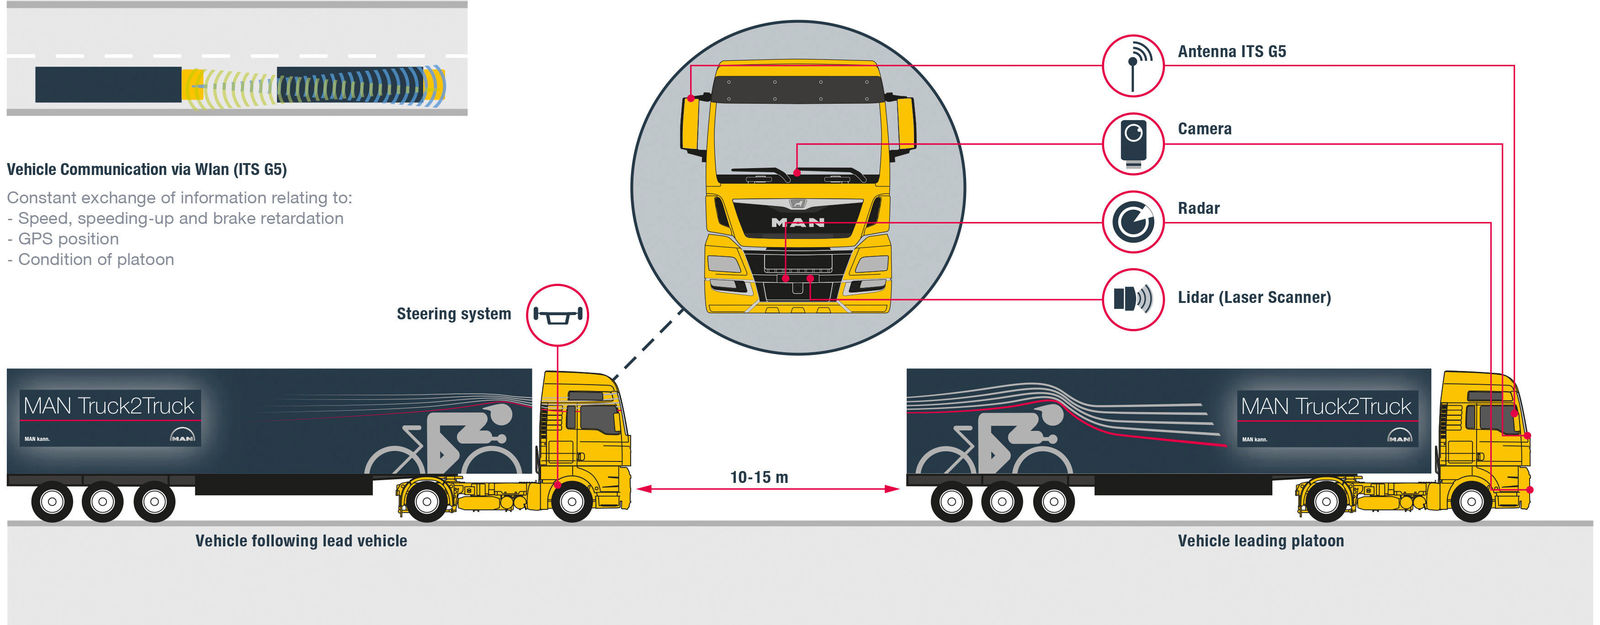 Goods transport of the future: MAN and Scania rely on digitally connected trucks